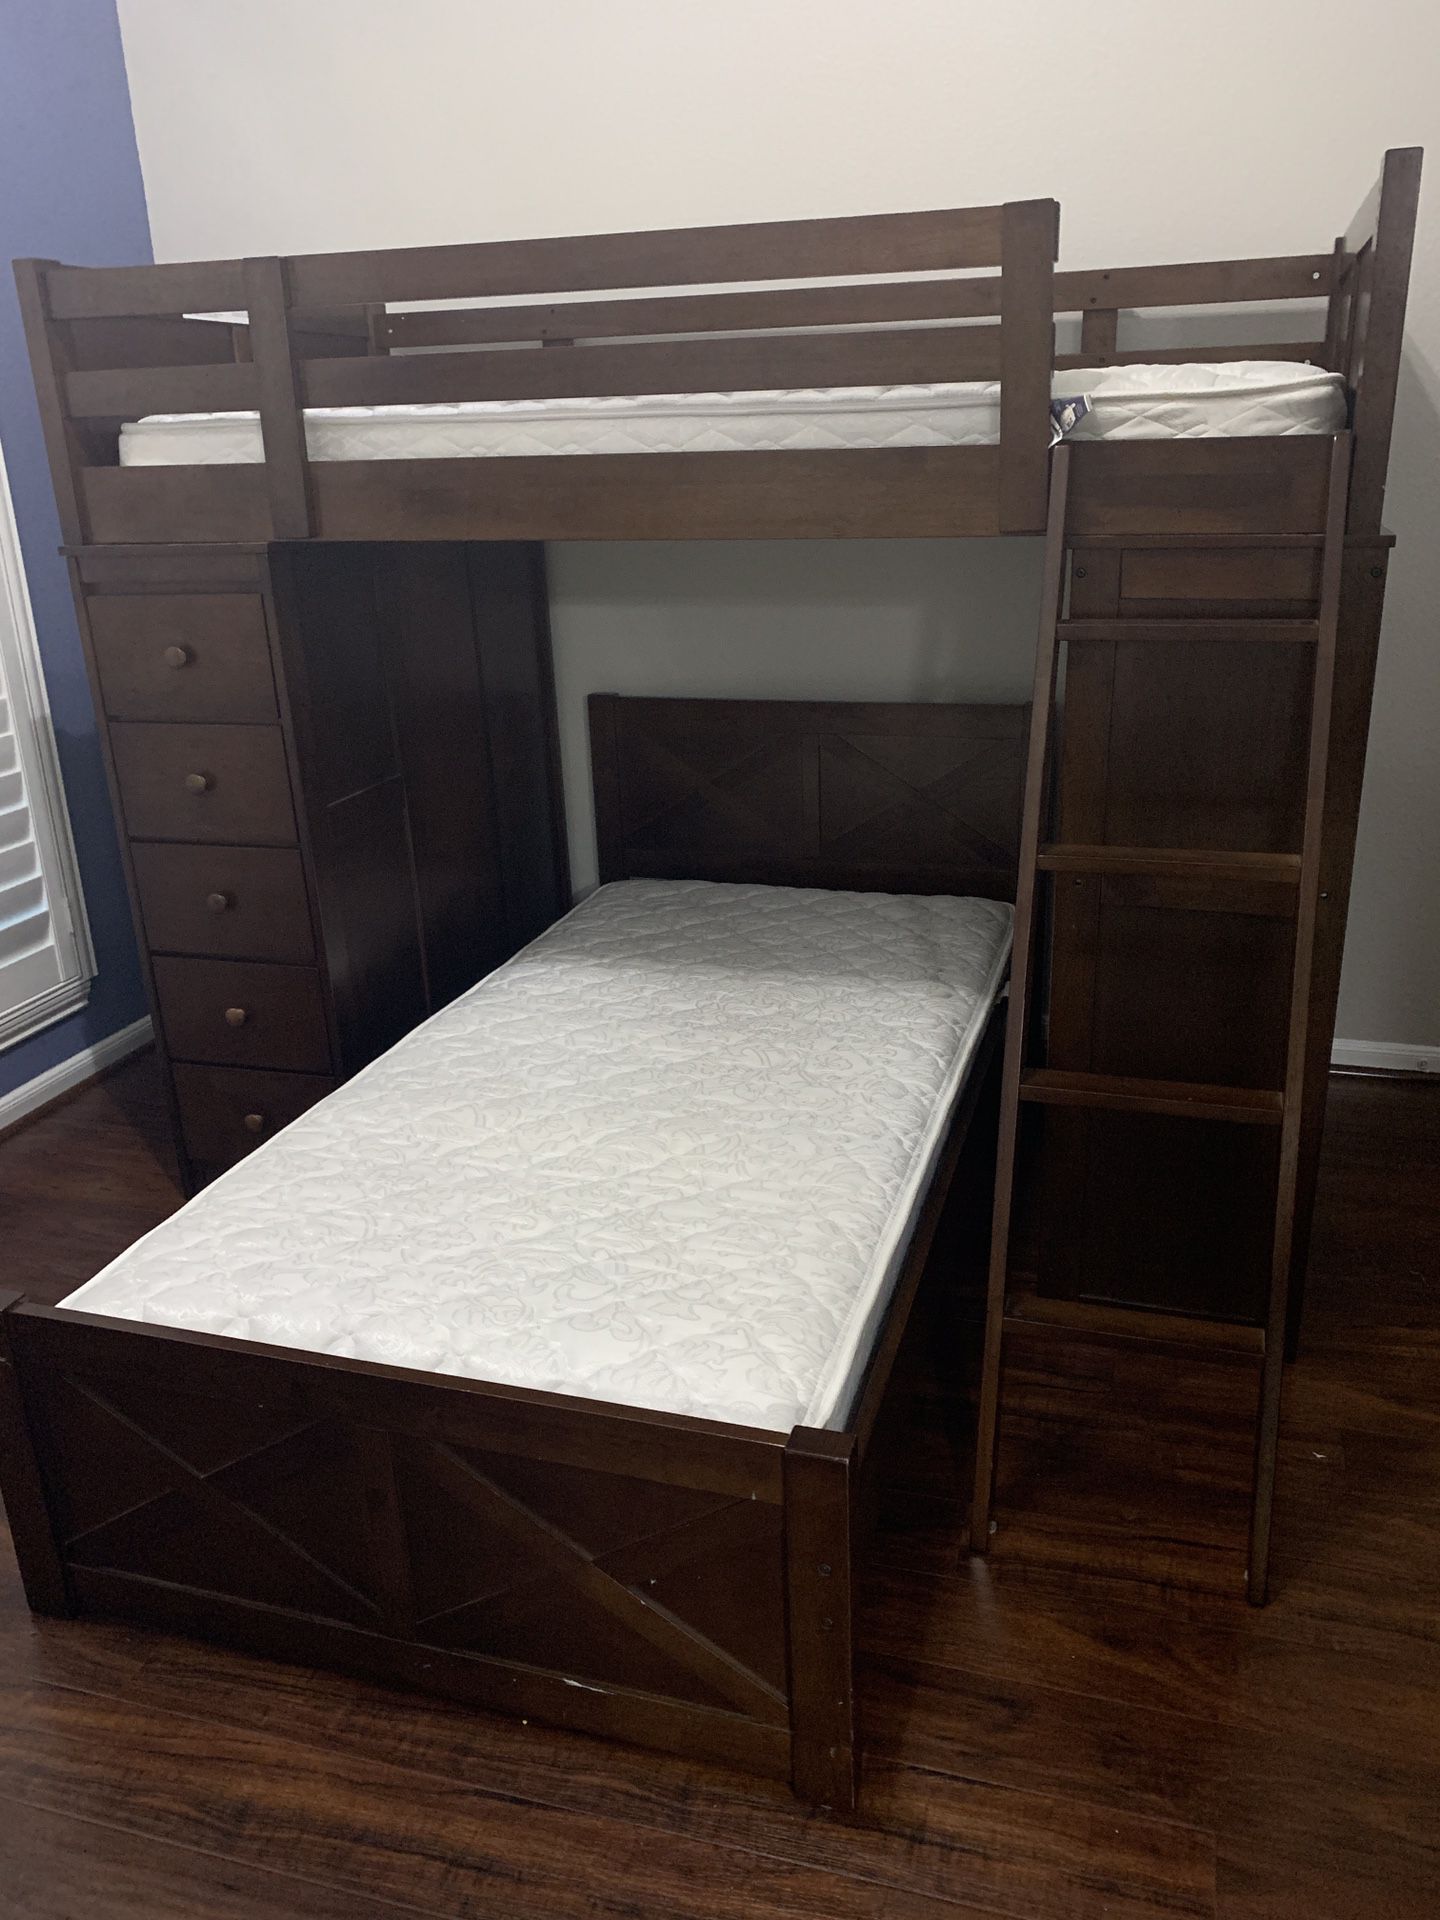 Bunk Bed with desk and drawers